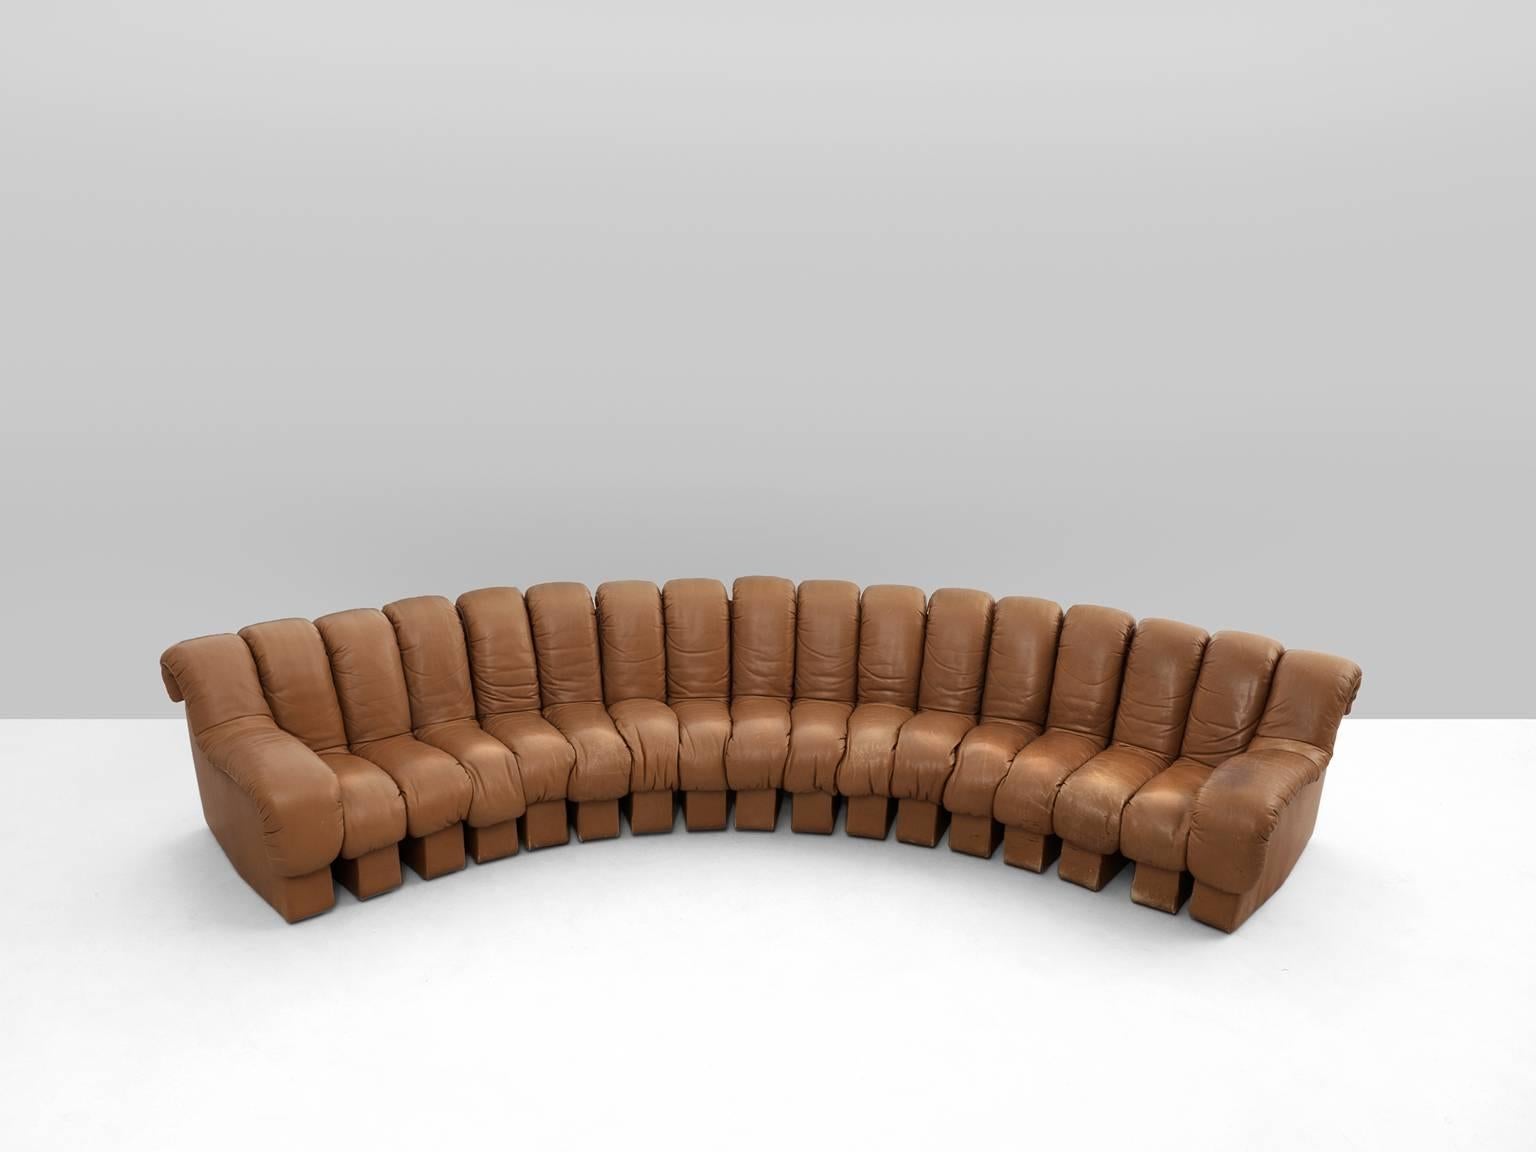 De Sede ‘Snake’ DS-600, in leather, Switzerland, 1972. 

DeSede 'Non Stop' sectional sofa containing 17 pieces in original cognac leather. 15 center pieces and two armrests. Any number of pieces can be zipped together ensuring an endless shape